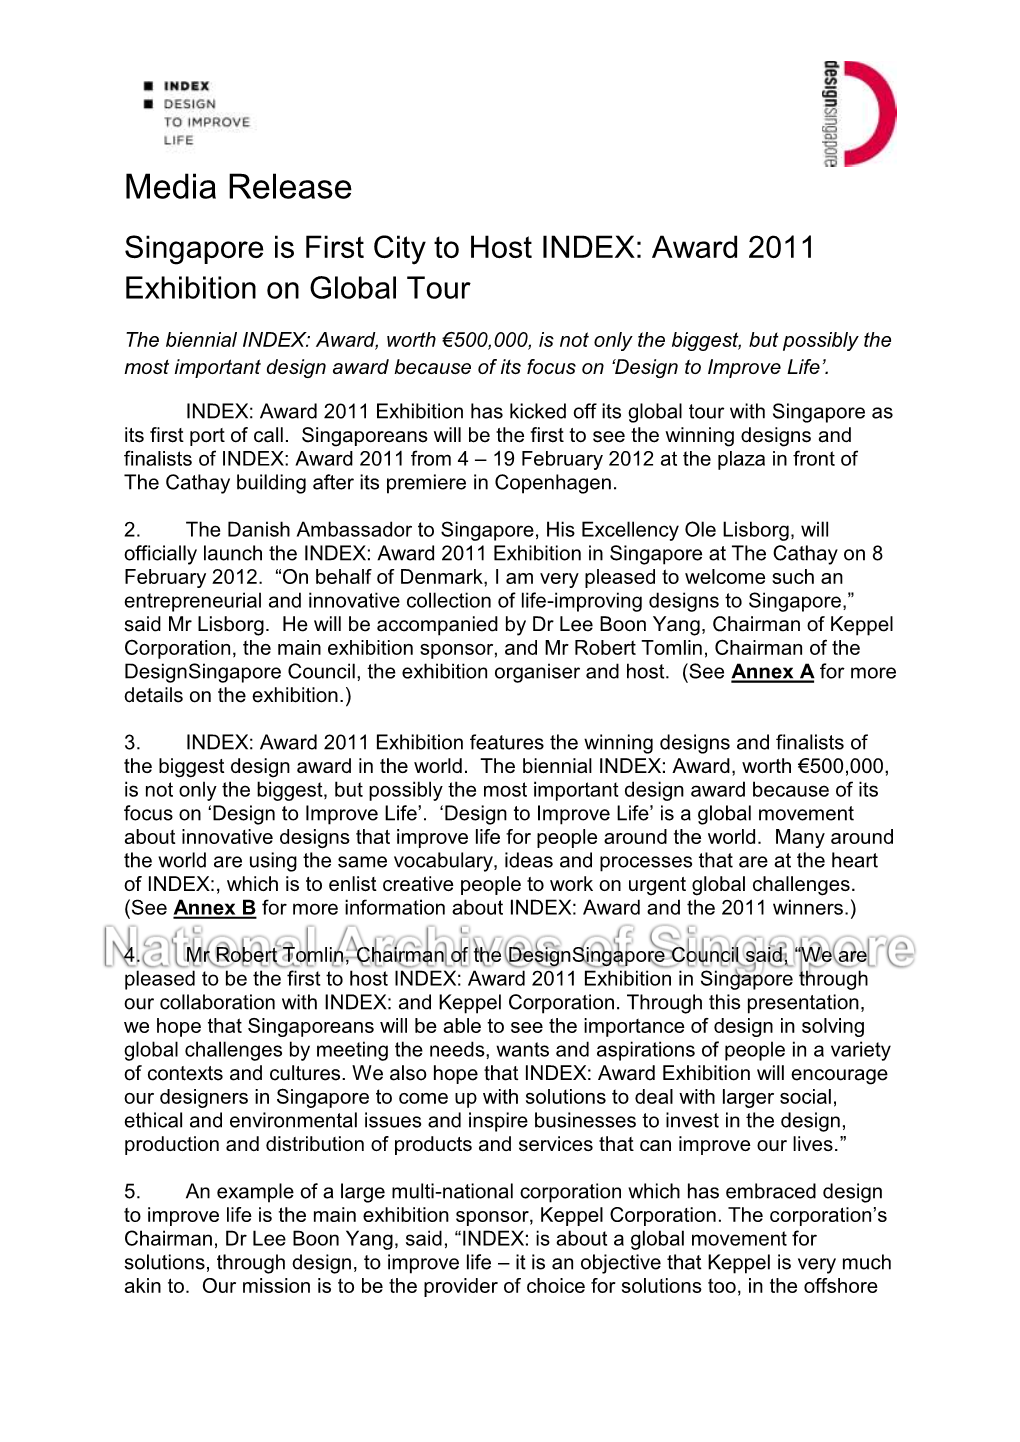 Media Release Singapore Is First City to Host INDEX: Award 2011 Exhibition on Global Tour